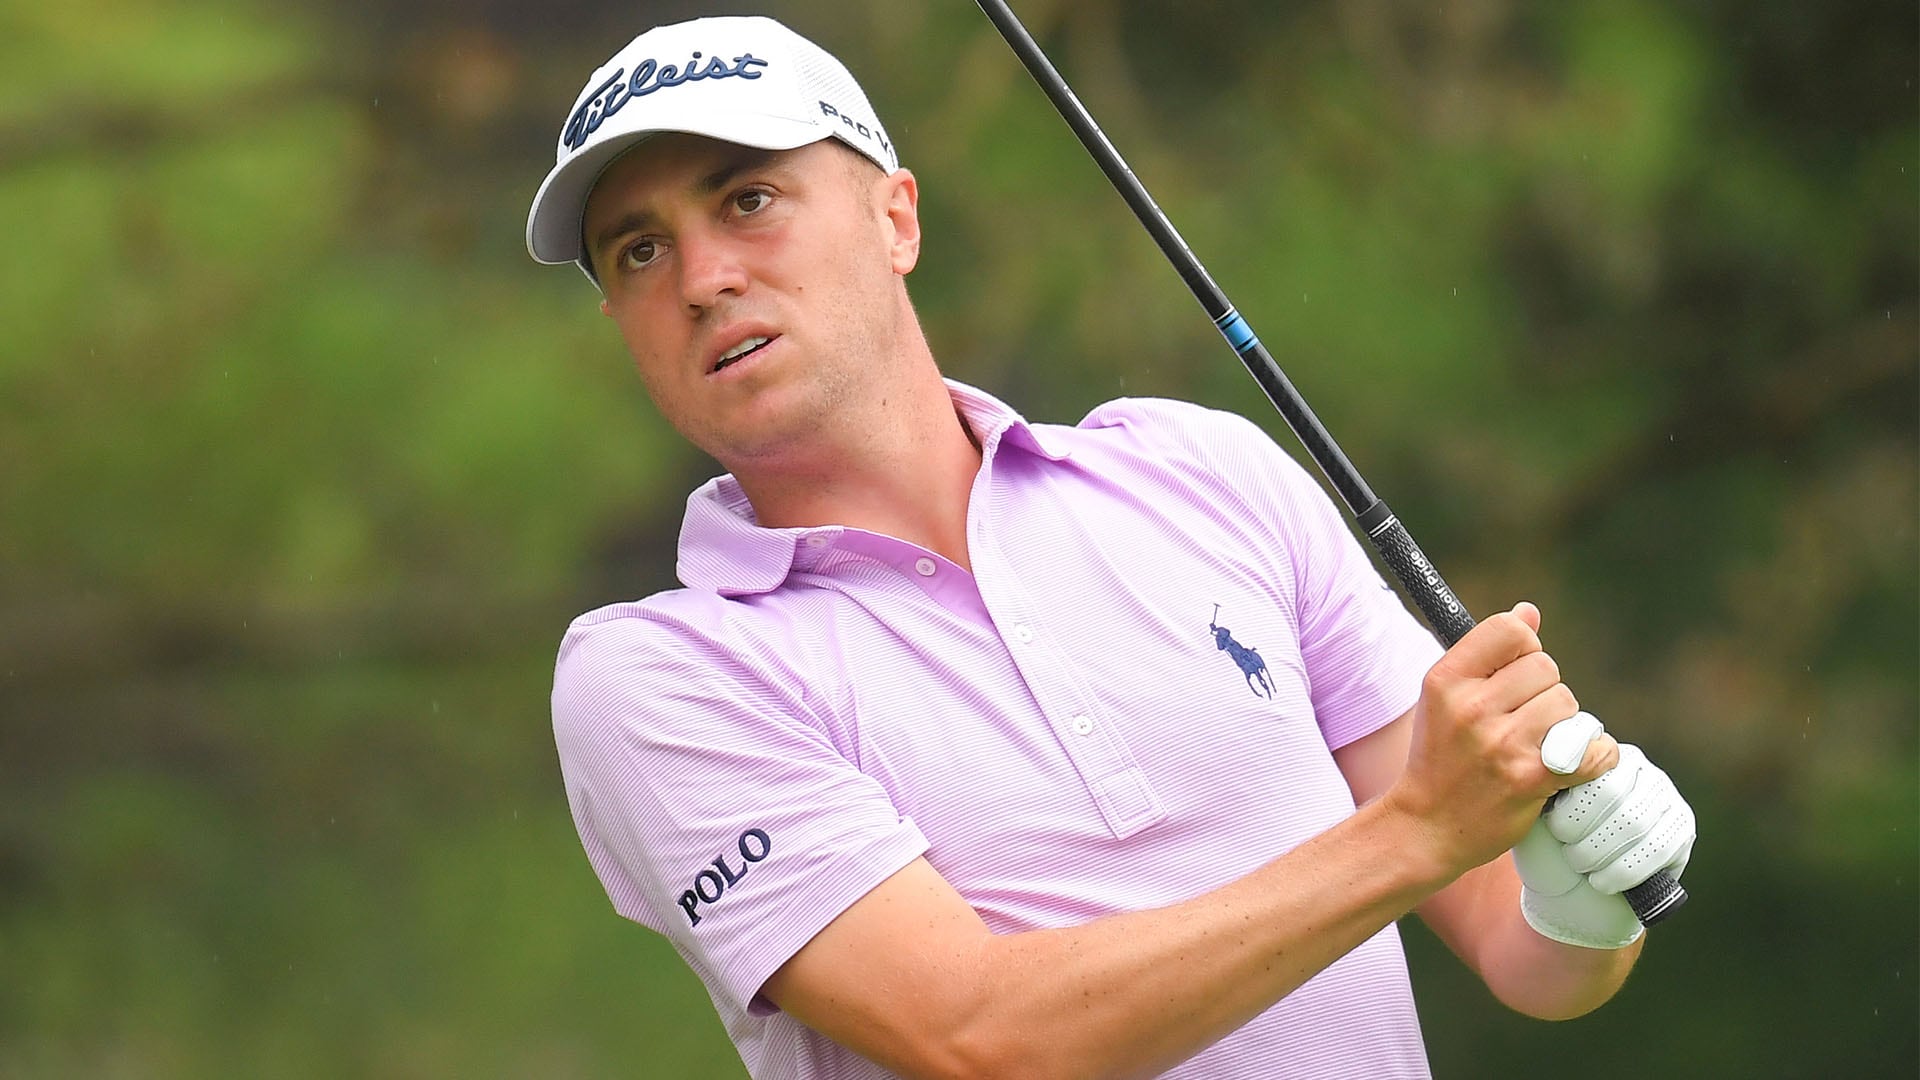 Justin Thomas appreciates Tour's safety as COVID-19 affects sports world 2